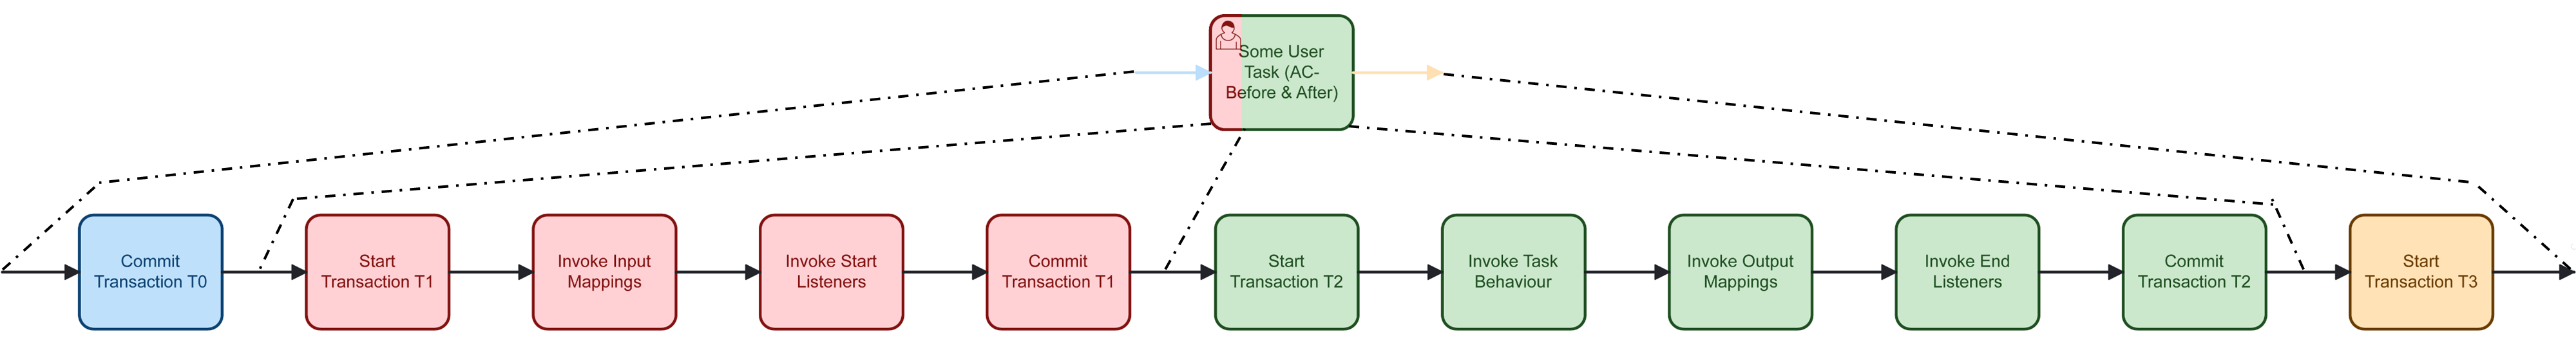 Transaction Boundaries for User Tasks with AC-Before